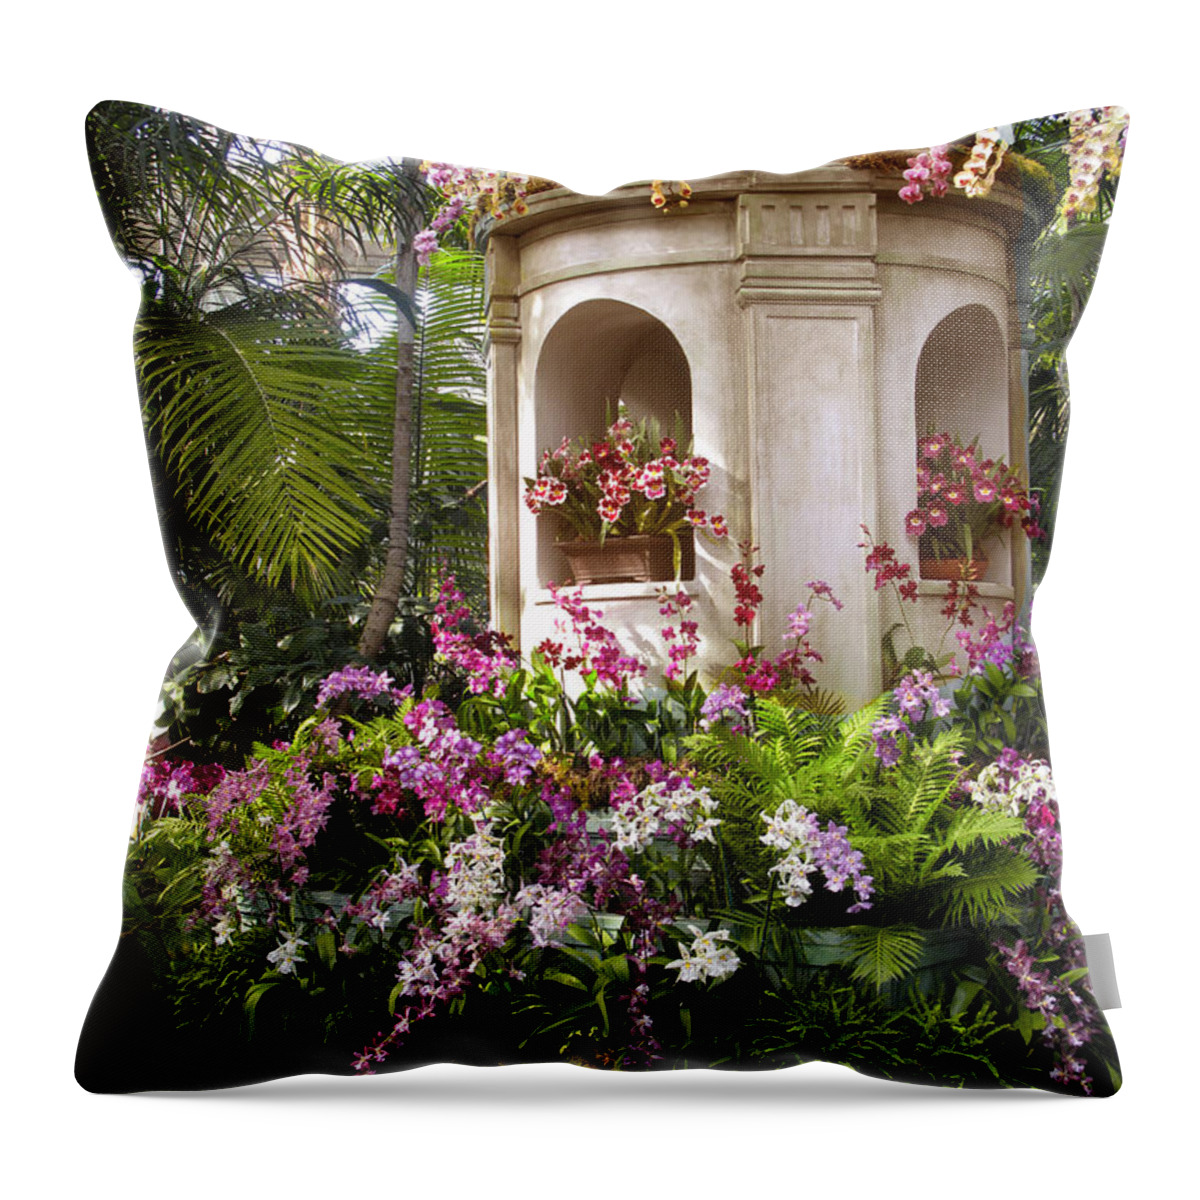 Orchids Throw Pillow featuring the photograph Tropical Orchids by Jessica Jenney